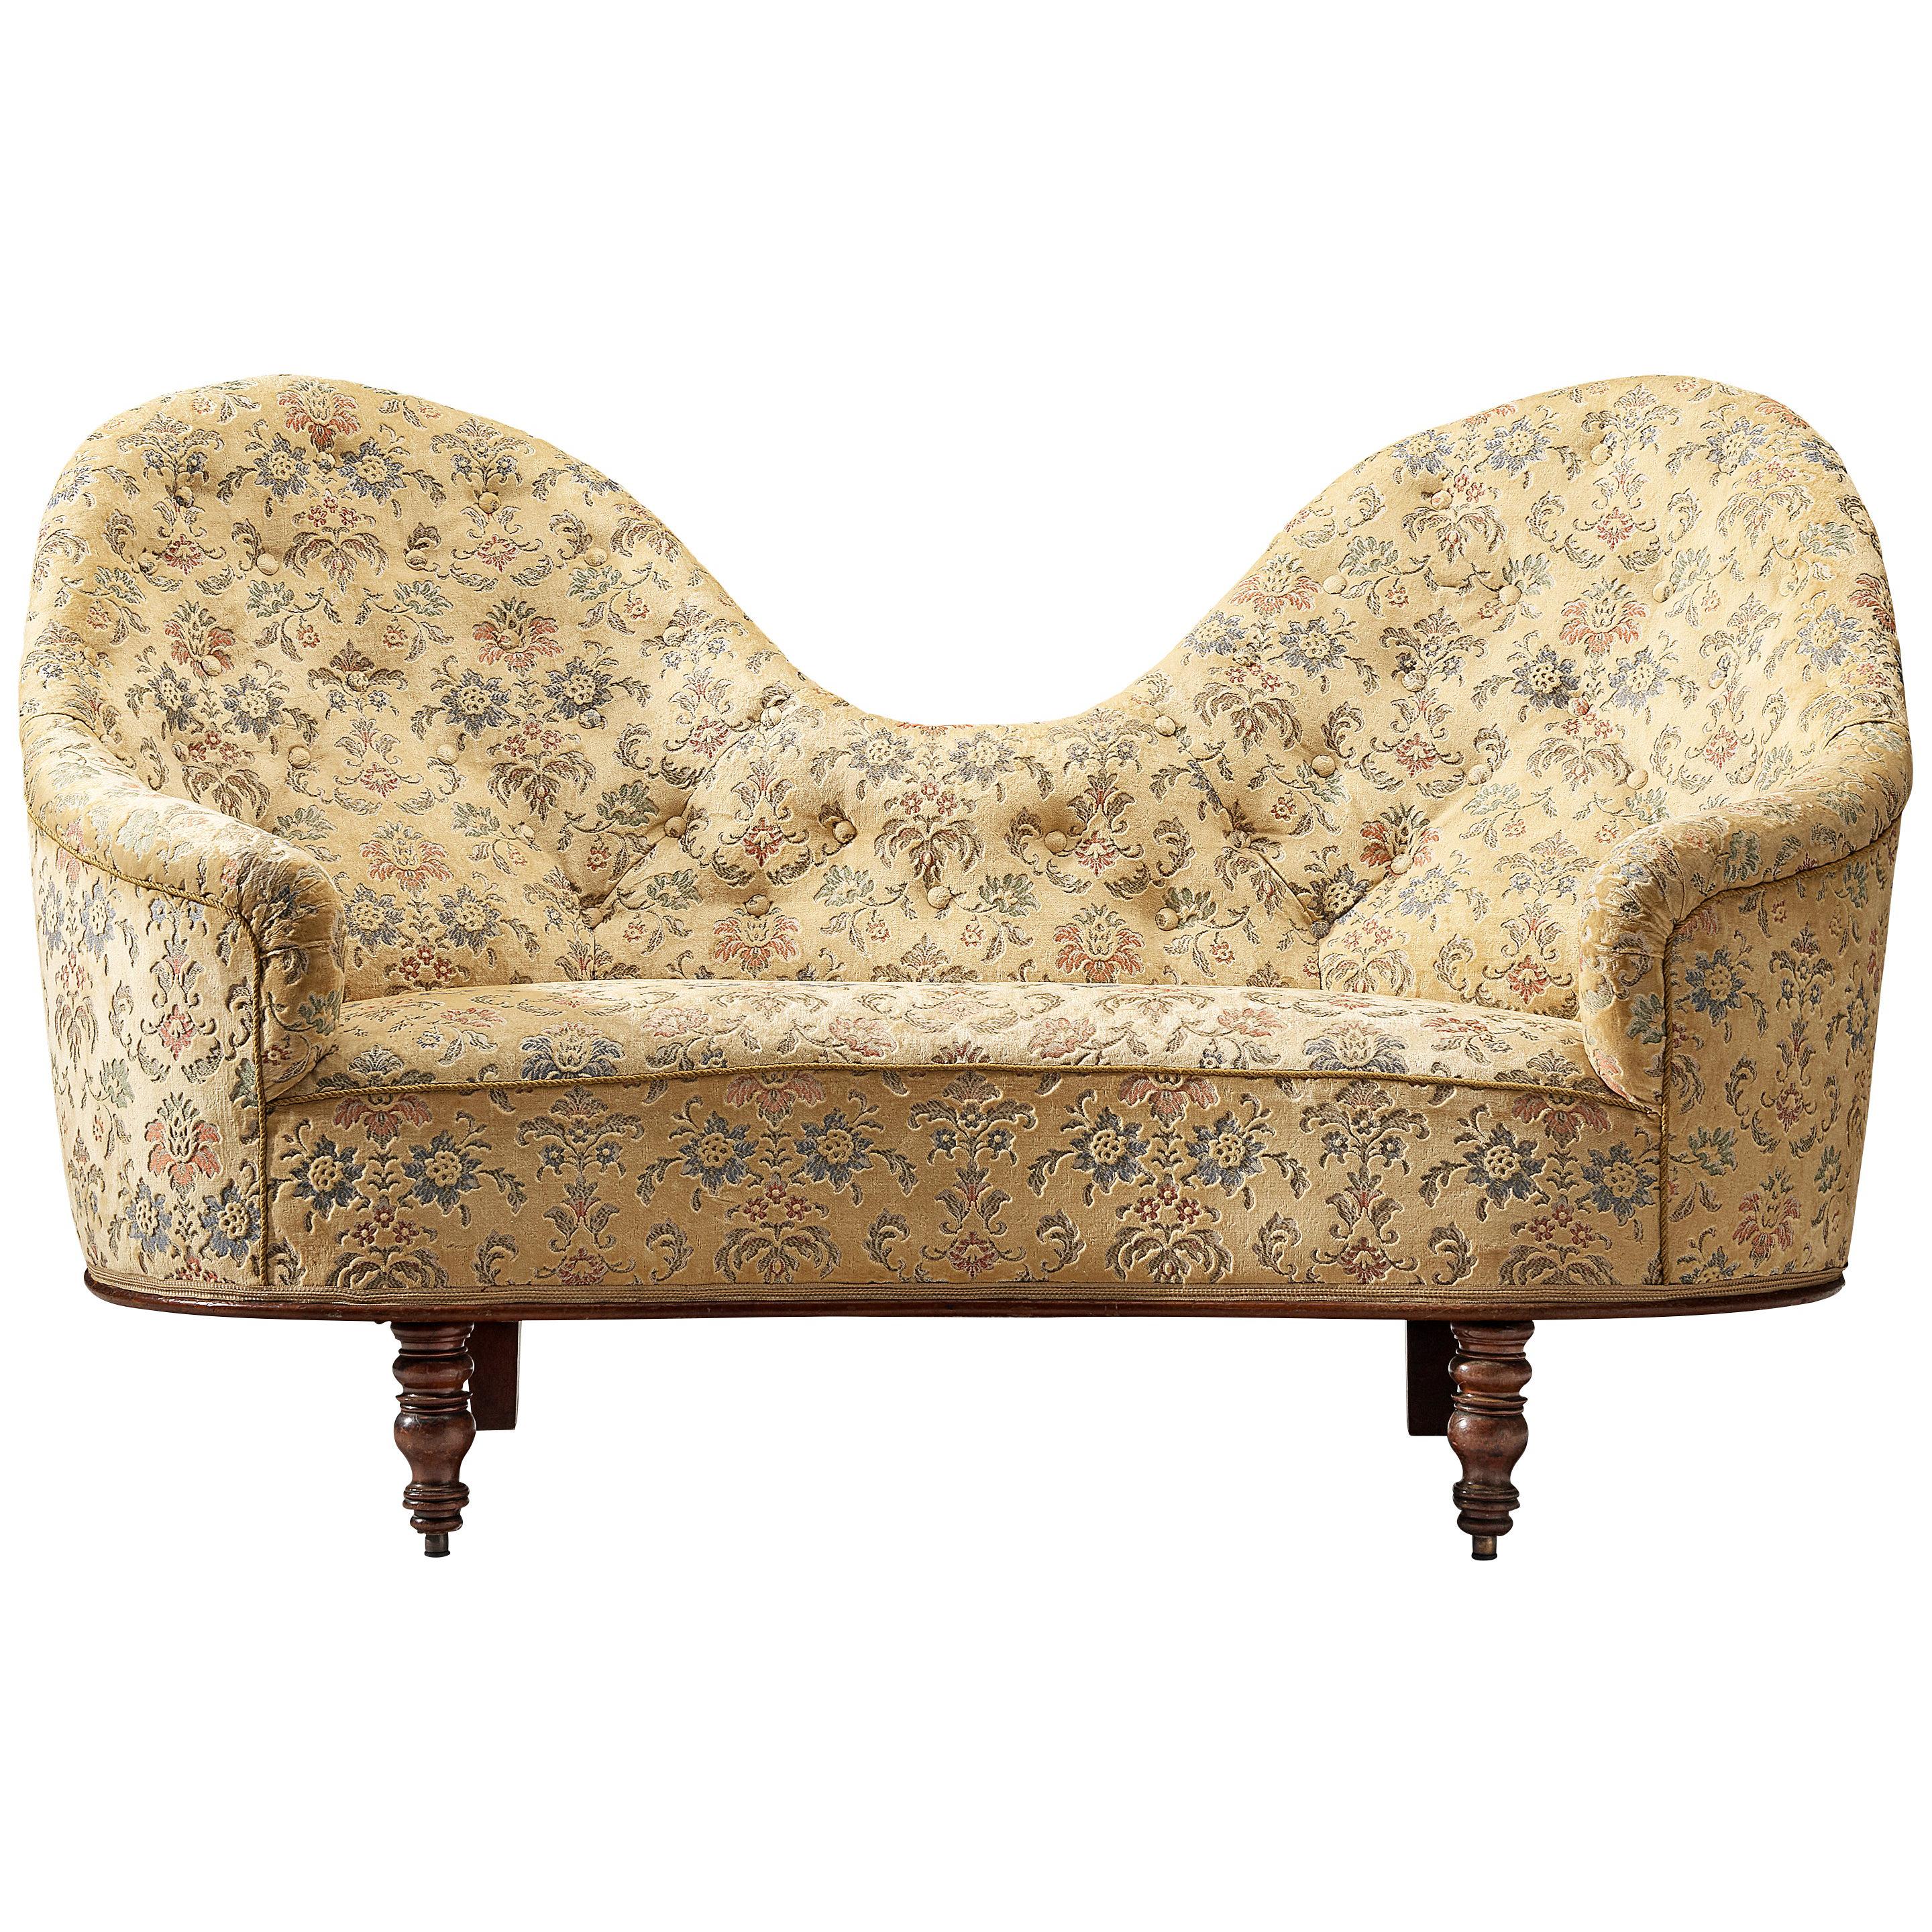 Art Deco Sofa with Floral Upholstery